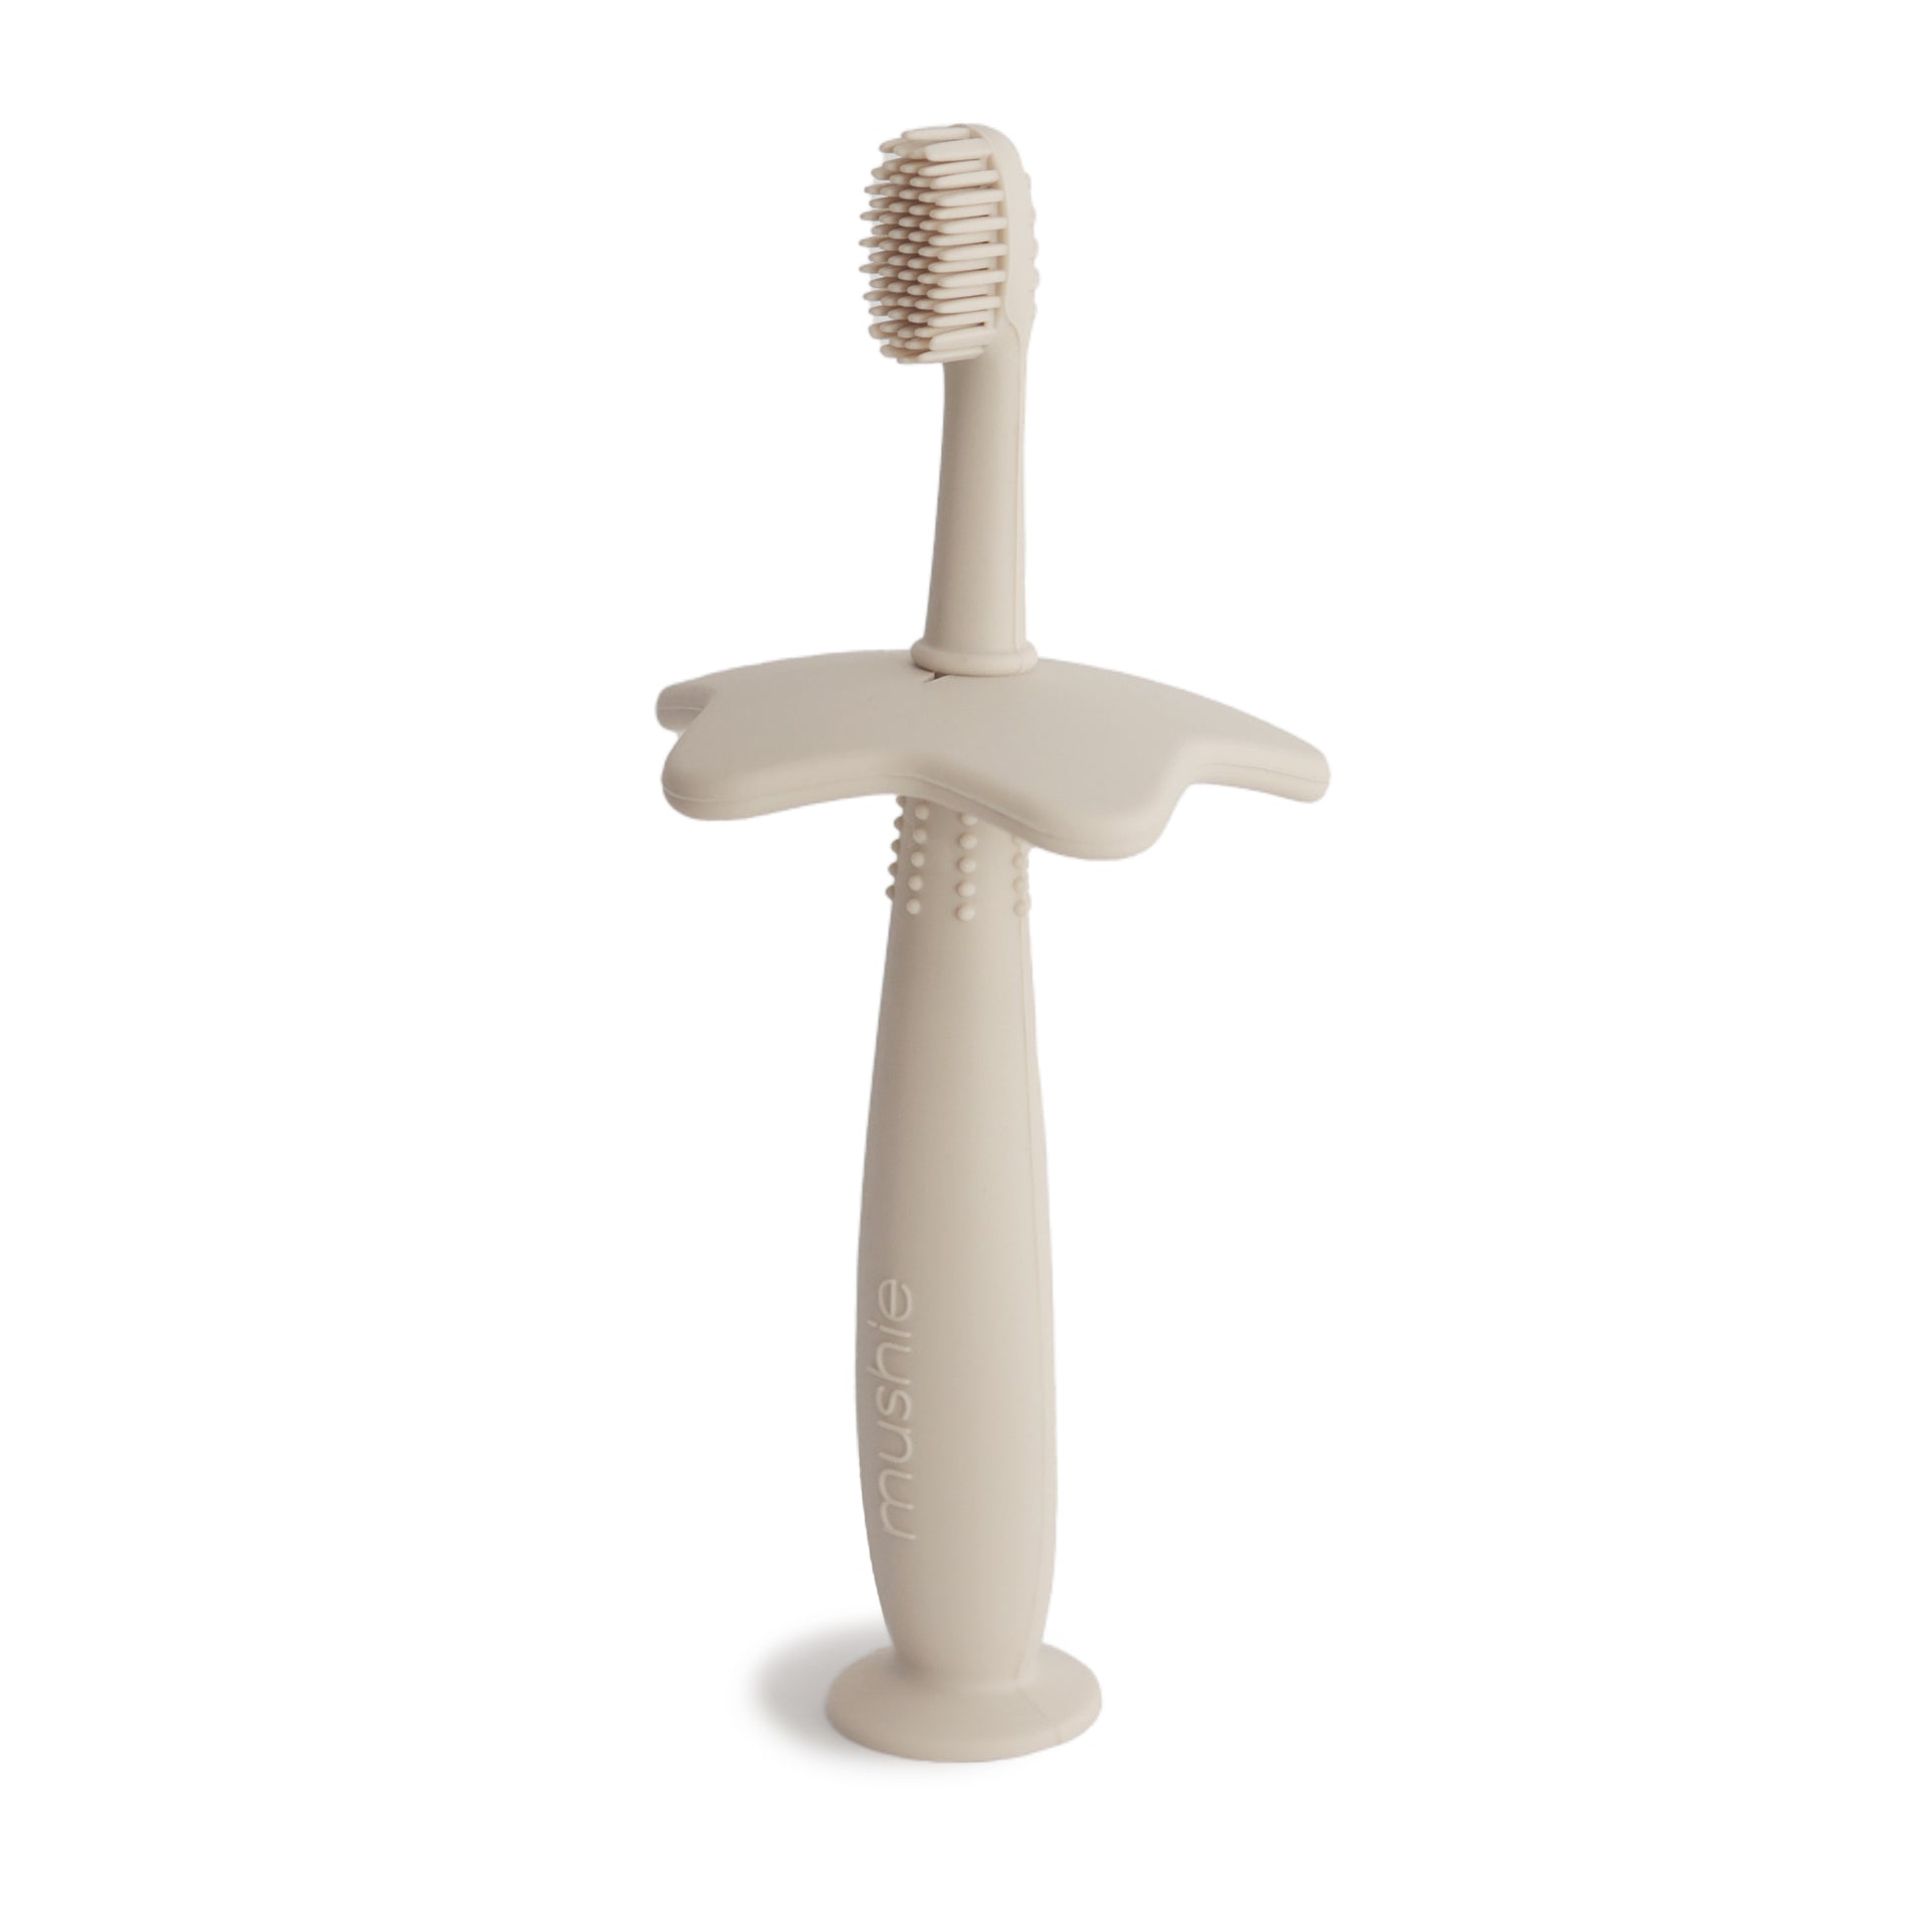 Star training toothbrush from mushie in shifting sand color